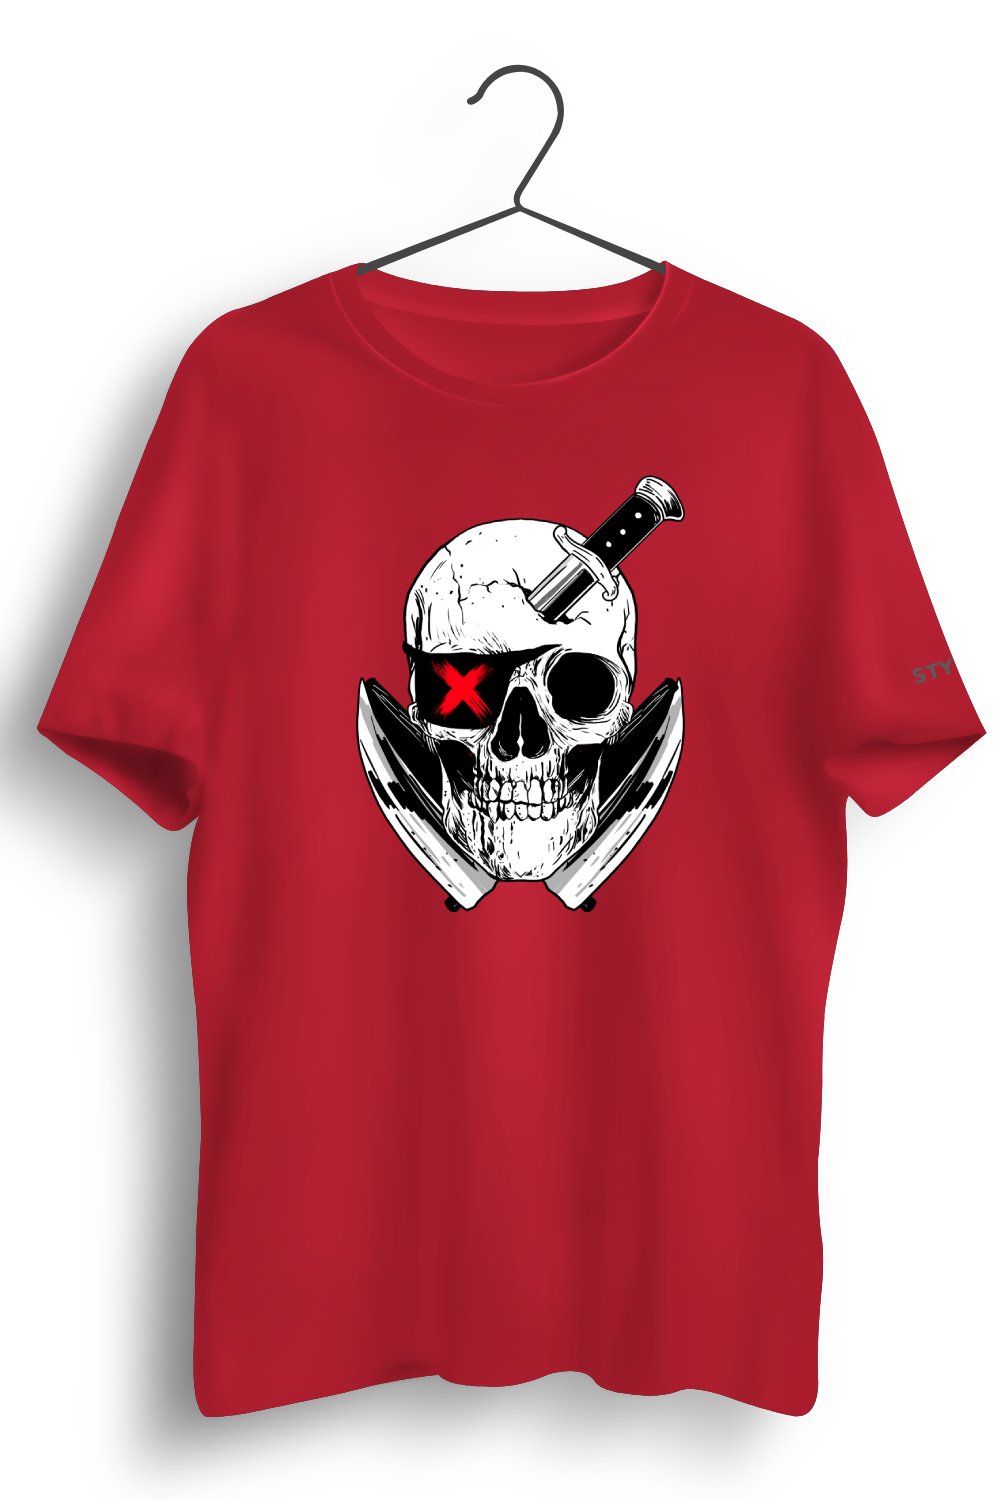 Dirty Pirate Graphic Printed Red Tshirt